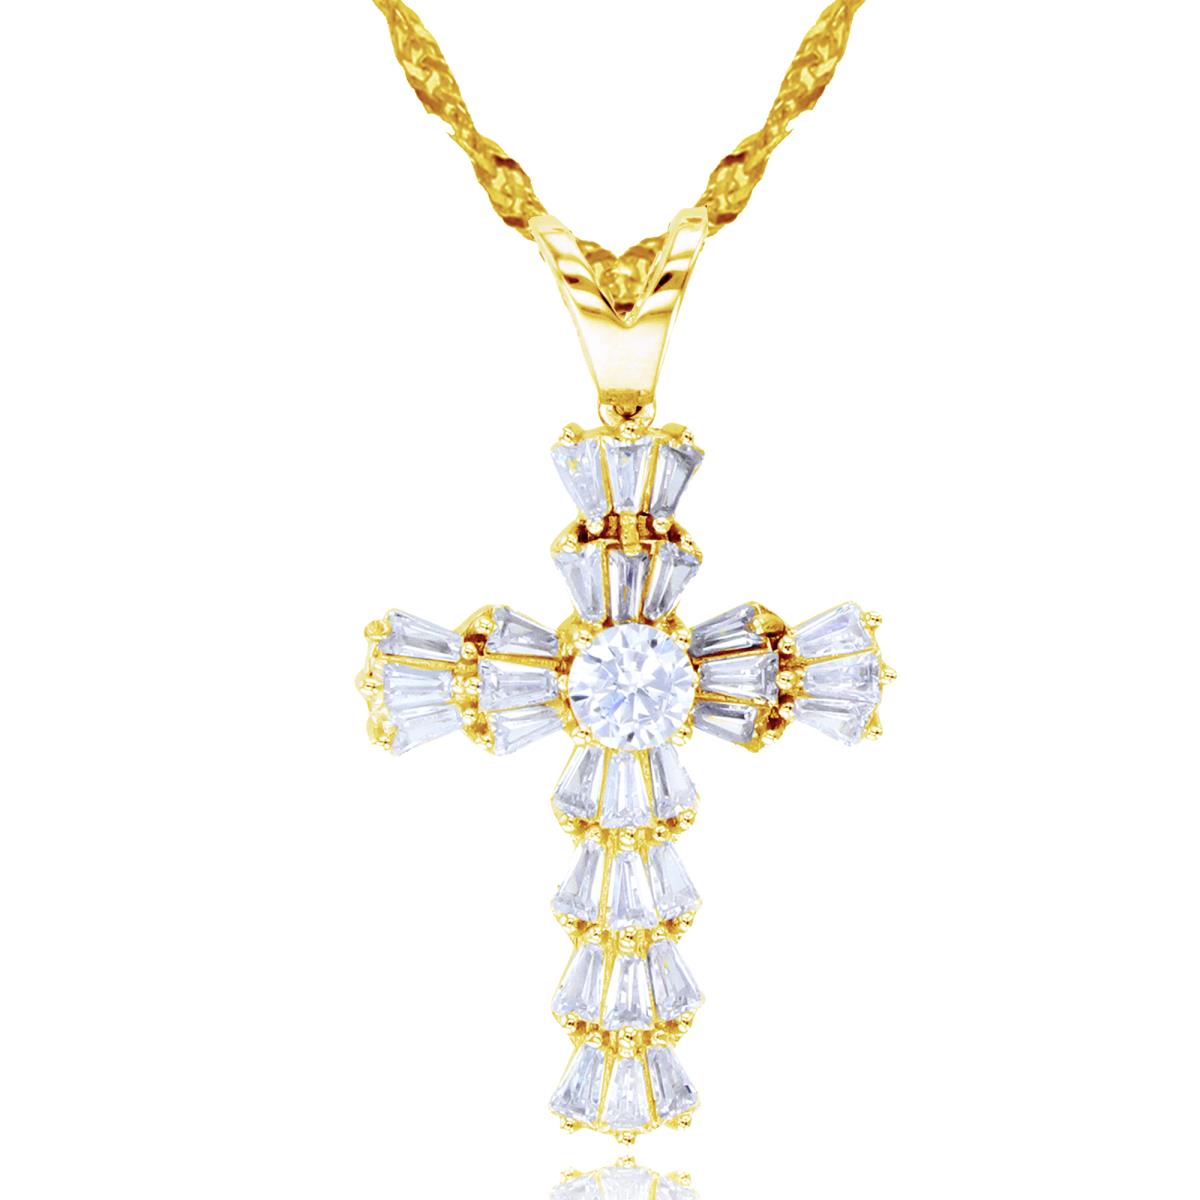 Sterling Silver+1Micron Yellow Gold 4.75mm Rnd CZ Center & TB CZ Layered Fancy Cross 18"+2" Sigapore Necklace